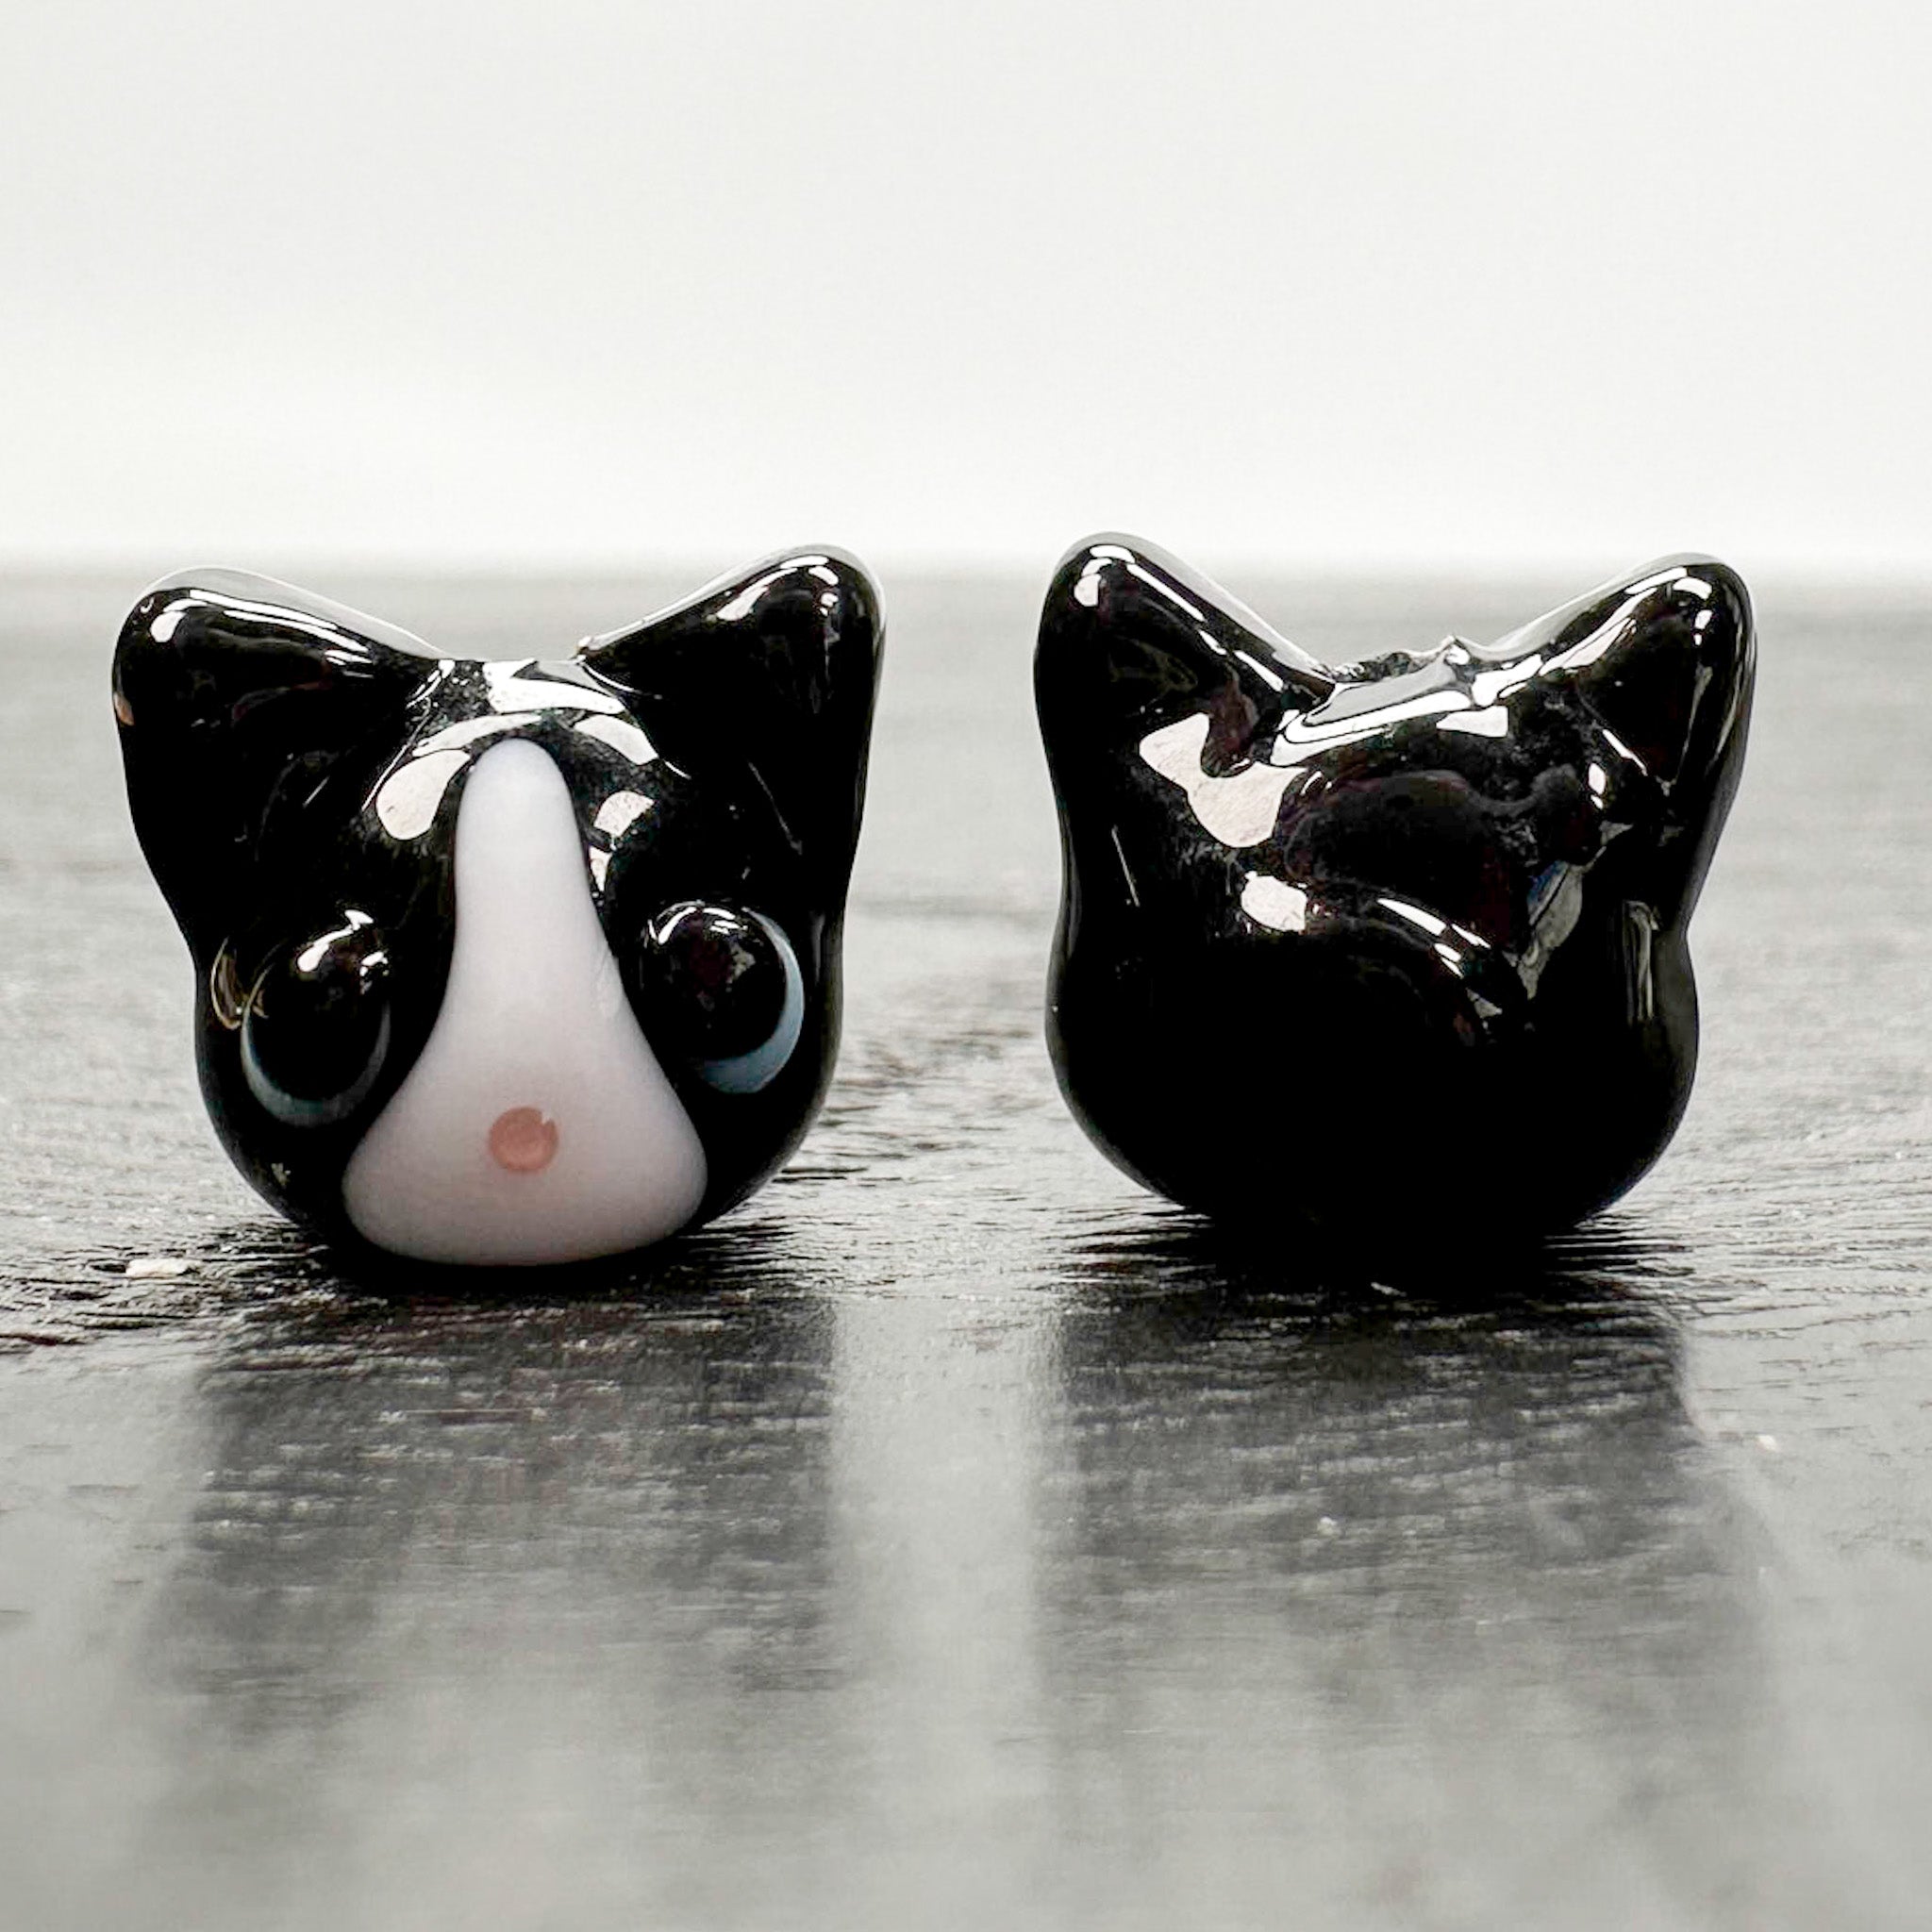 Handmade Glass Beads from Japan: Cats